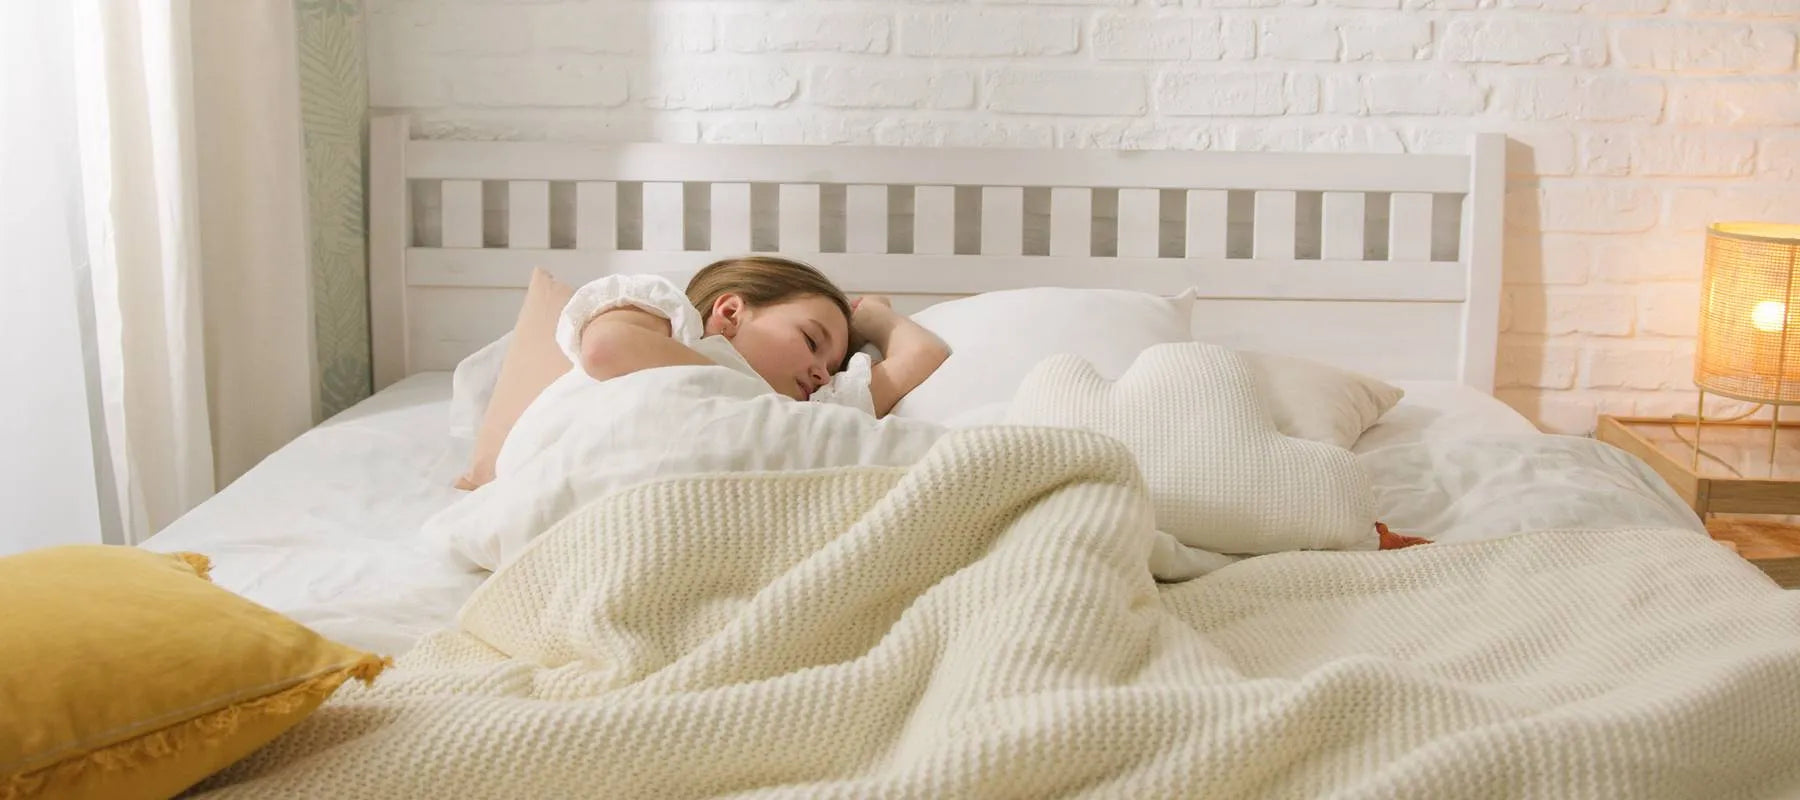 Individual experiencing serene sleep on a new mattress with peace of mind in purchase